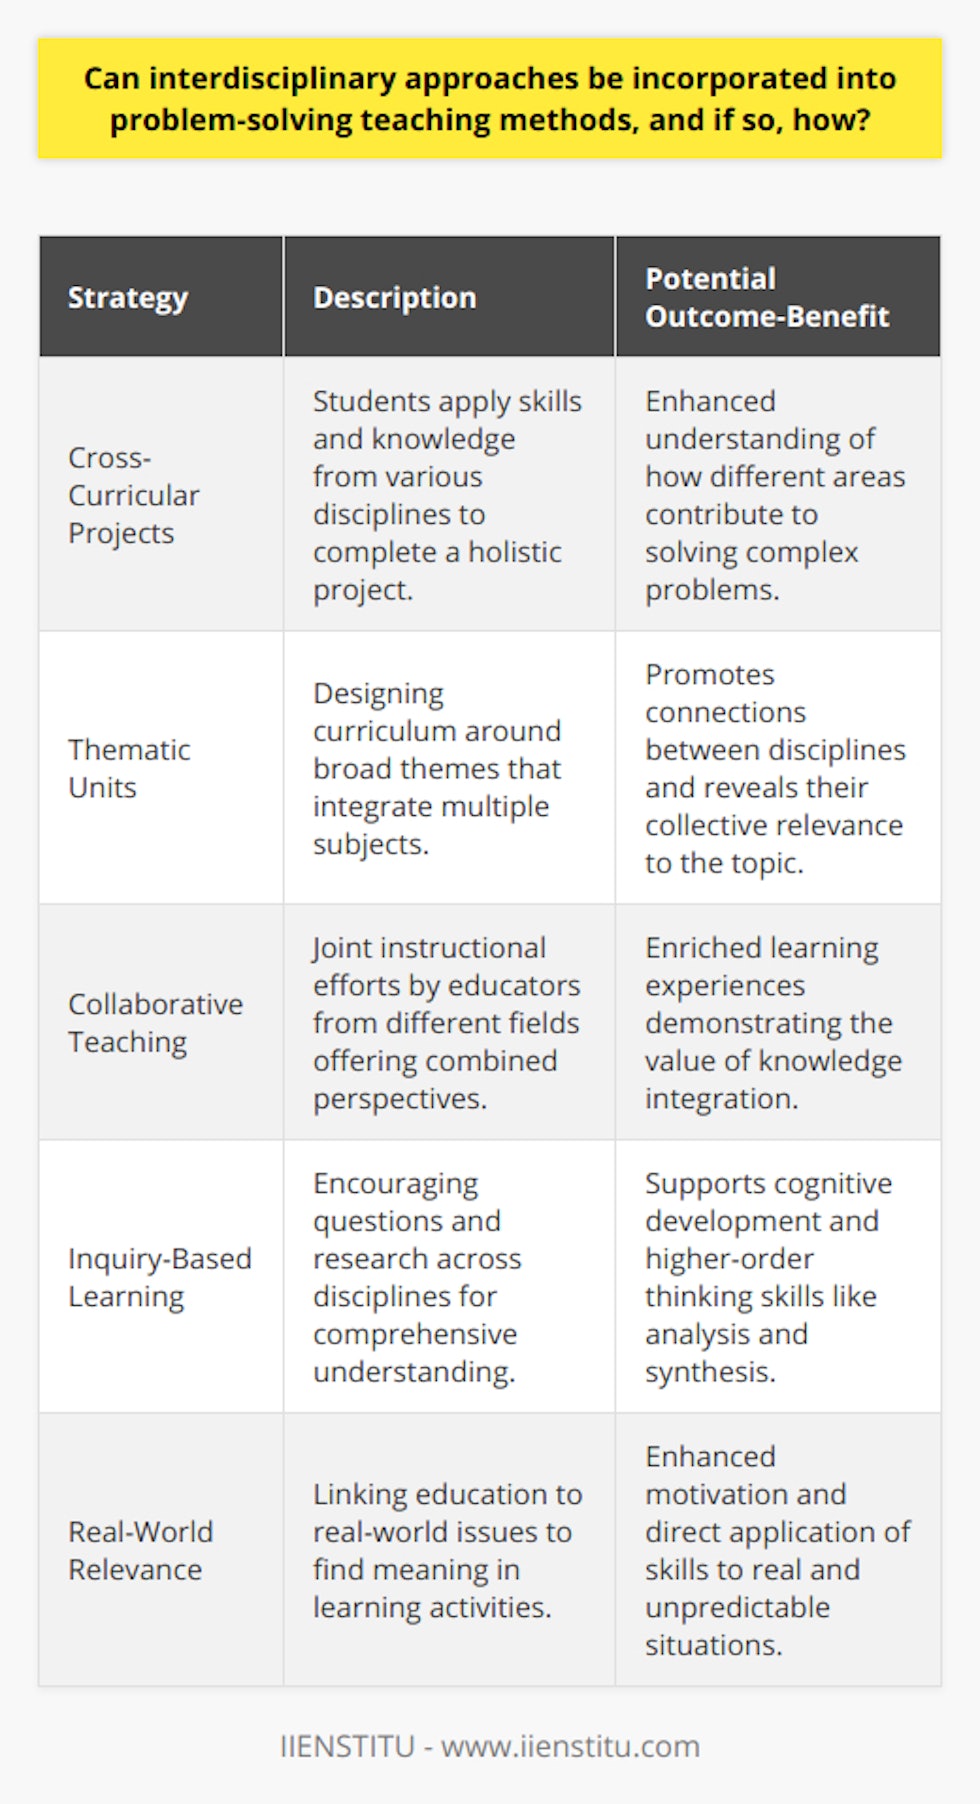 Interdisciplinary approaches in problem-solving teaching methods present a contemporary framework for preparing students to tackle the complexities of real-world issues. This approach can bridge the gap between various academic disciplines, offering students a more holistic and connected way of thinking.**Embracing Complexity through Interdisciplinary Problem-Solving**Problem-solving in education is no longer confined to single-subject exercises. Interdisciplinary problem-solving recognizes the multifaceted nature of real issues and encourages students to tackle them by drawing from multiple disciplines. For instance, when examining the impacts of urbanization, students might incorporate knowledge from sociology, economics, environmental science, and urban planning.**Strategies for Implementing an Interdisciplinary Approach**Various strategies can be employed to incorporate interdisciplinary methods effectively:1. **Cross-Curricular Projects**: These require students to apply knowledge and skills across different subject areas, fostering an understanding of each discipline’s unique contribution to the whole problem.2. **Thematic Units**: By designing units around broad themes, educators can seamlessly weave multiple subjects into the exploration of a single topic, prompting students to see connections between different areas of study.3. **Collaborative Teaching**: When educators from different disciplines co-teach, they can provide a combined perspective that enriches the learning experience and demonstrates the value of integrating knowledge.4. **Inquiry-Based Learning**: Encourages students to ask questions and conduct research across multiple disciplines, leading to comprehensive investigations and solutions.**Outcome-Benefits of Interdisciplinary Teaching**The merits of an interdisciplinary approach within problem-solving teaching methods are manifold:1. **Complex Problem Understanding**: It can elevate a student’s ability to deconstruct complicated issues by understanding various factors and viewpoints.2. **Adaptability**: Students learn to apply knowledge pragmatically, enabling them to adapt to new and unforeseen problems.3. **Enhanced Cognitive Abilities**: The process can promote cognitive growth, supporting the development of higher-order thinking skills like analysis and synthesis.4. **Real-World Relevance**: Students find meaning and motivation in their work when they see its relevance outside the classroom walls.In summary, integrating interdisciplinary approaches into problem-solving methods is a highly effective way to provide students with robust and adaptable skills for the future. By engaging in project-based learning activities, enjoying the support of proactive educators, and seeing the interconnectivity across subjects, students can foster critical thinking, creativity, and collaborative abilities that transcend traditional learning boundaries. As we navigate a rapidly evolving and interrelated global landscape, such approaches to education become not just advantageous but essential.